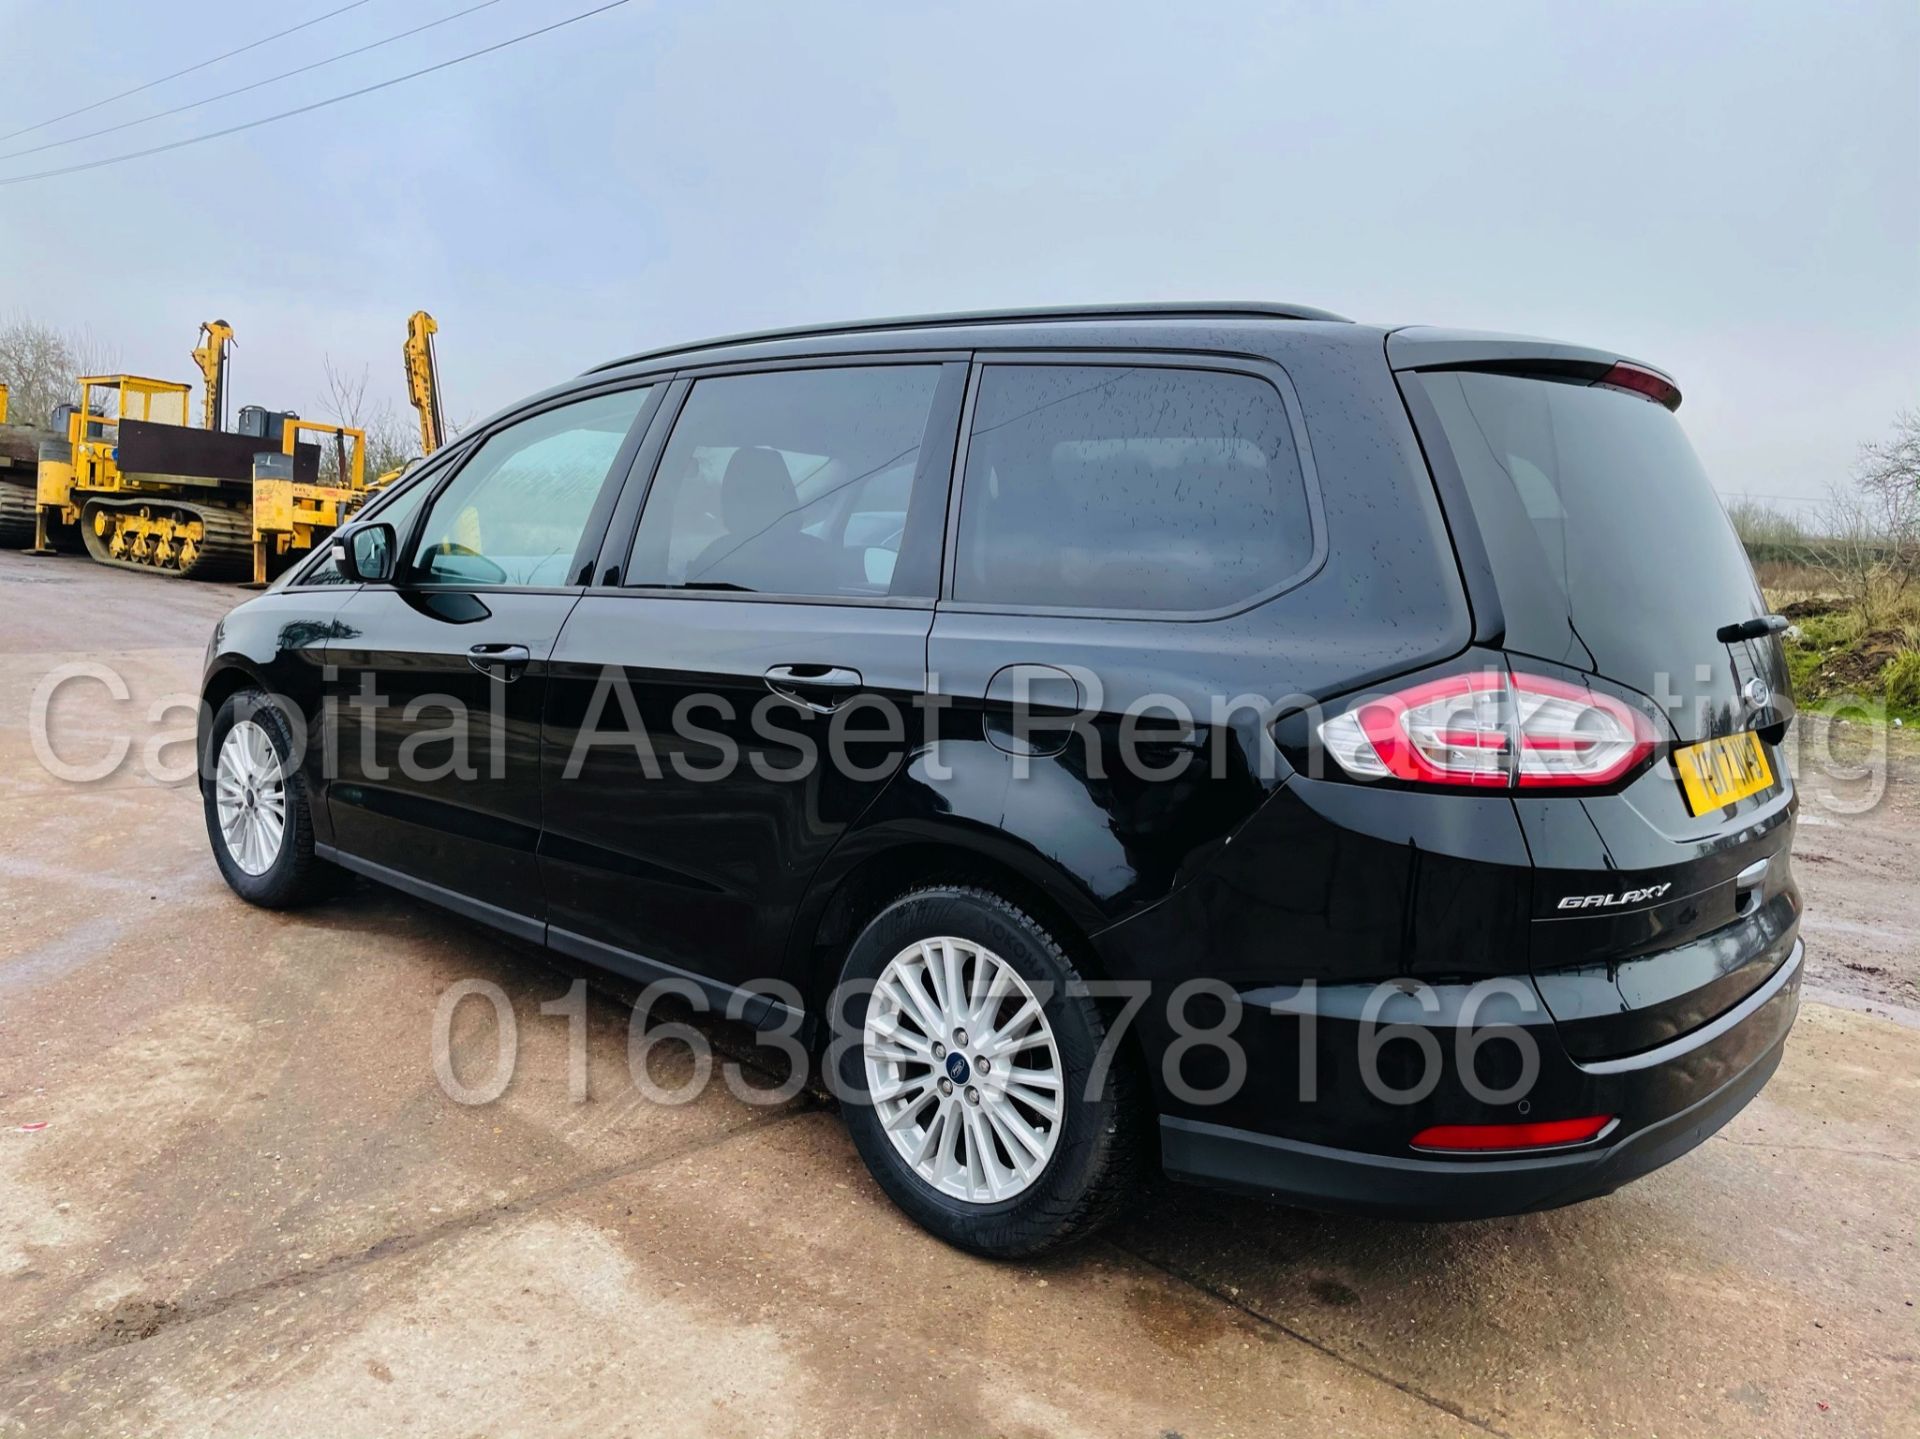 ON SALE FORD GALAXY *ZETEC EDITION* 7 SEATER MPV (2017 - EURO 6) '2.0 TDCI - AUTO' (- FULL HISTORY) - Image 9 of 48